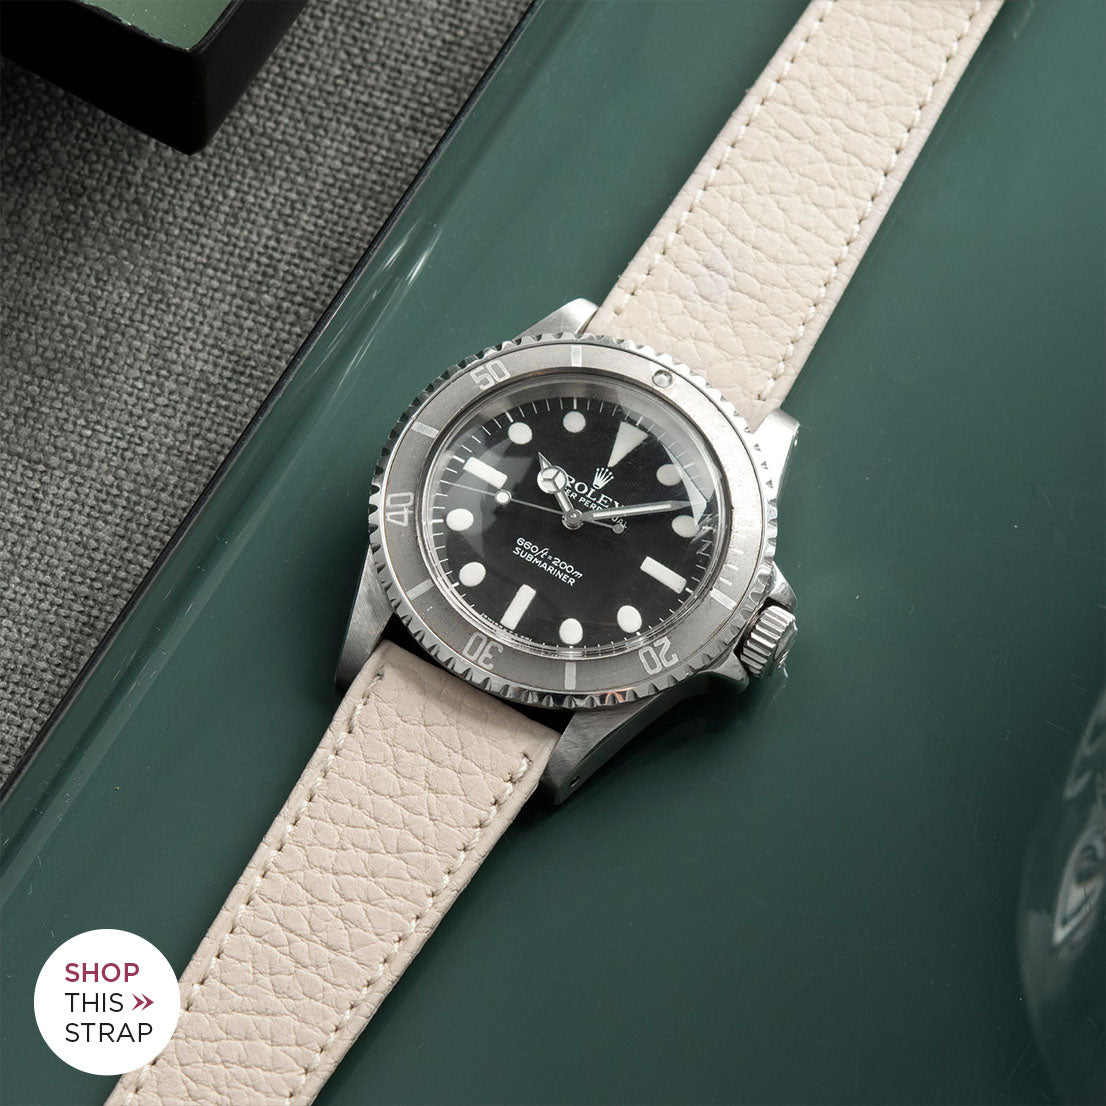 Bulang and Sons_Strap Guide_The Rolex 5513 Faded Maxi Submariner_Taurillon Creme Speedy Leather Watch Strap